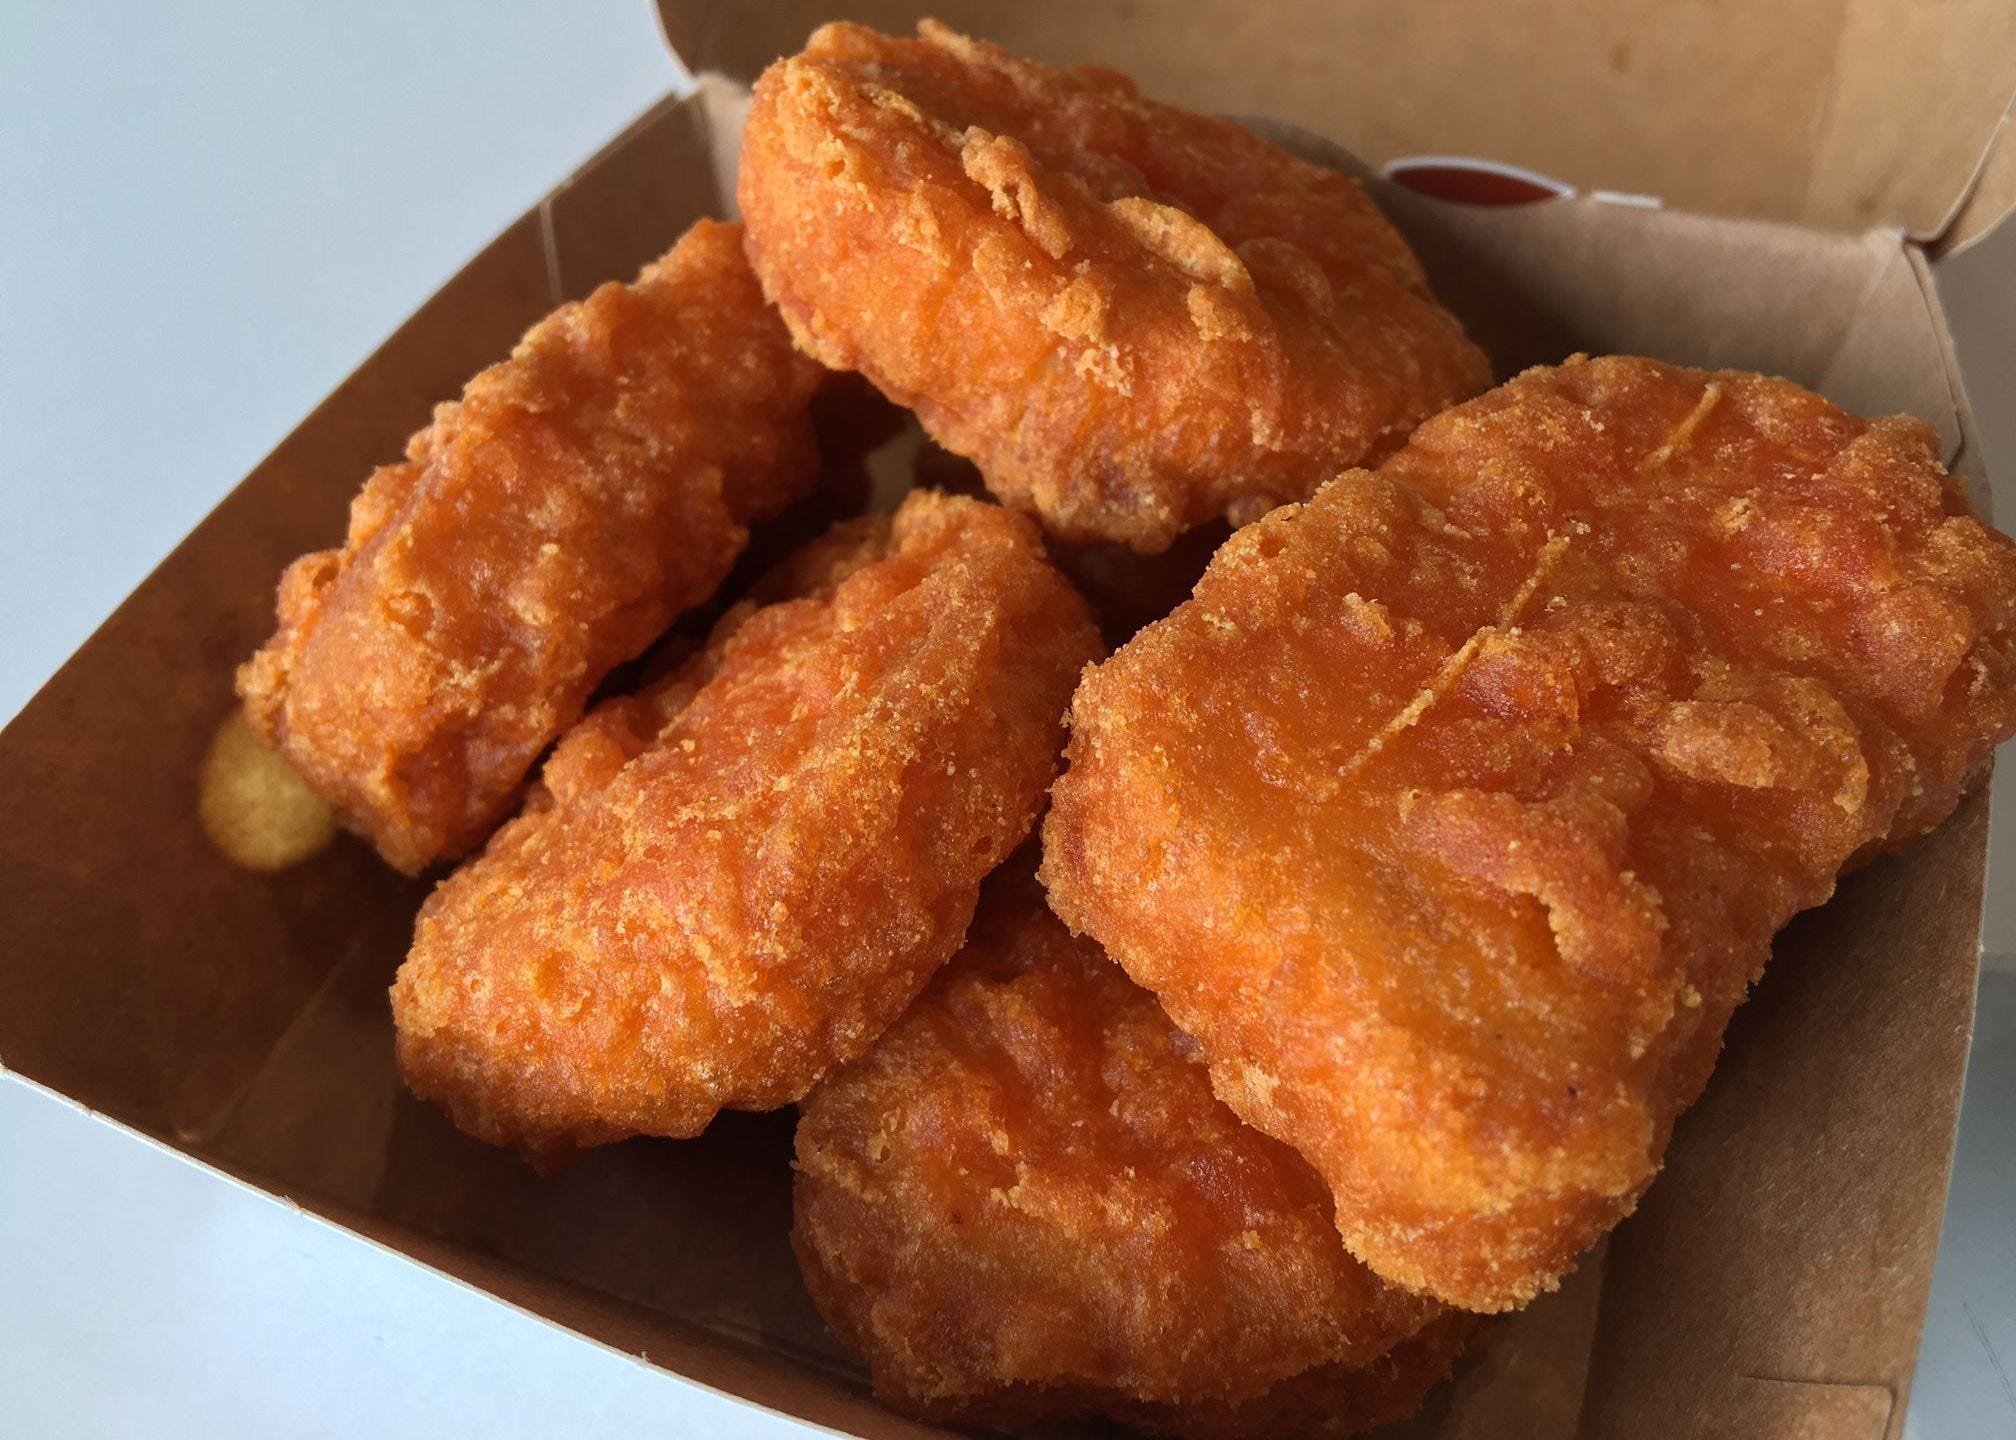 How Hot Are McDonald's Spicy Chicken Nuggets? We Found Out